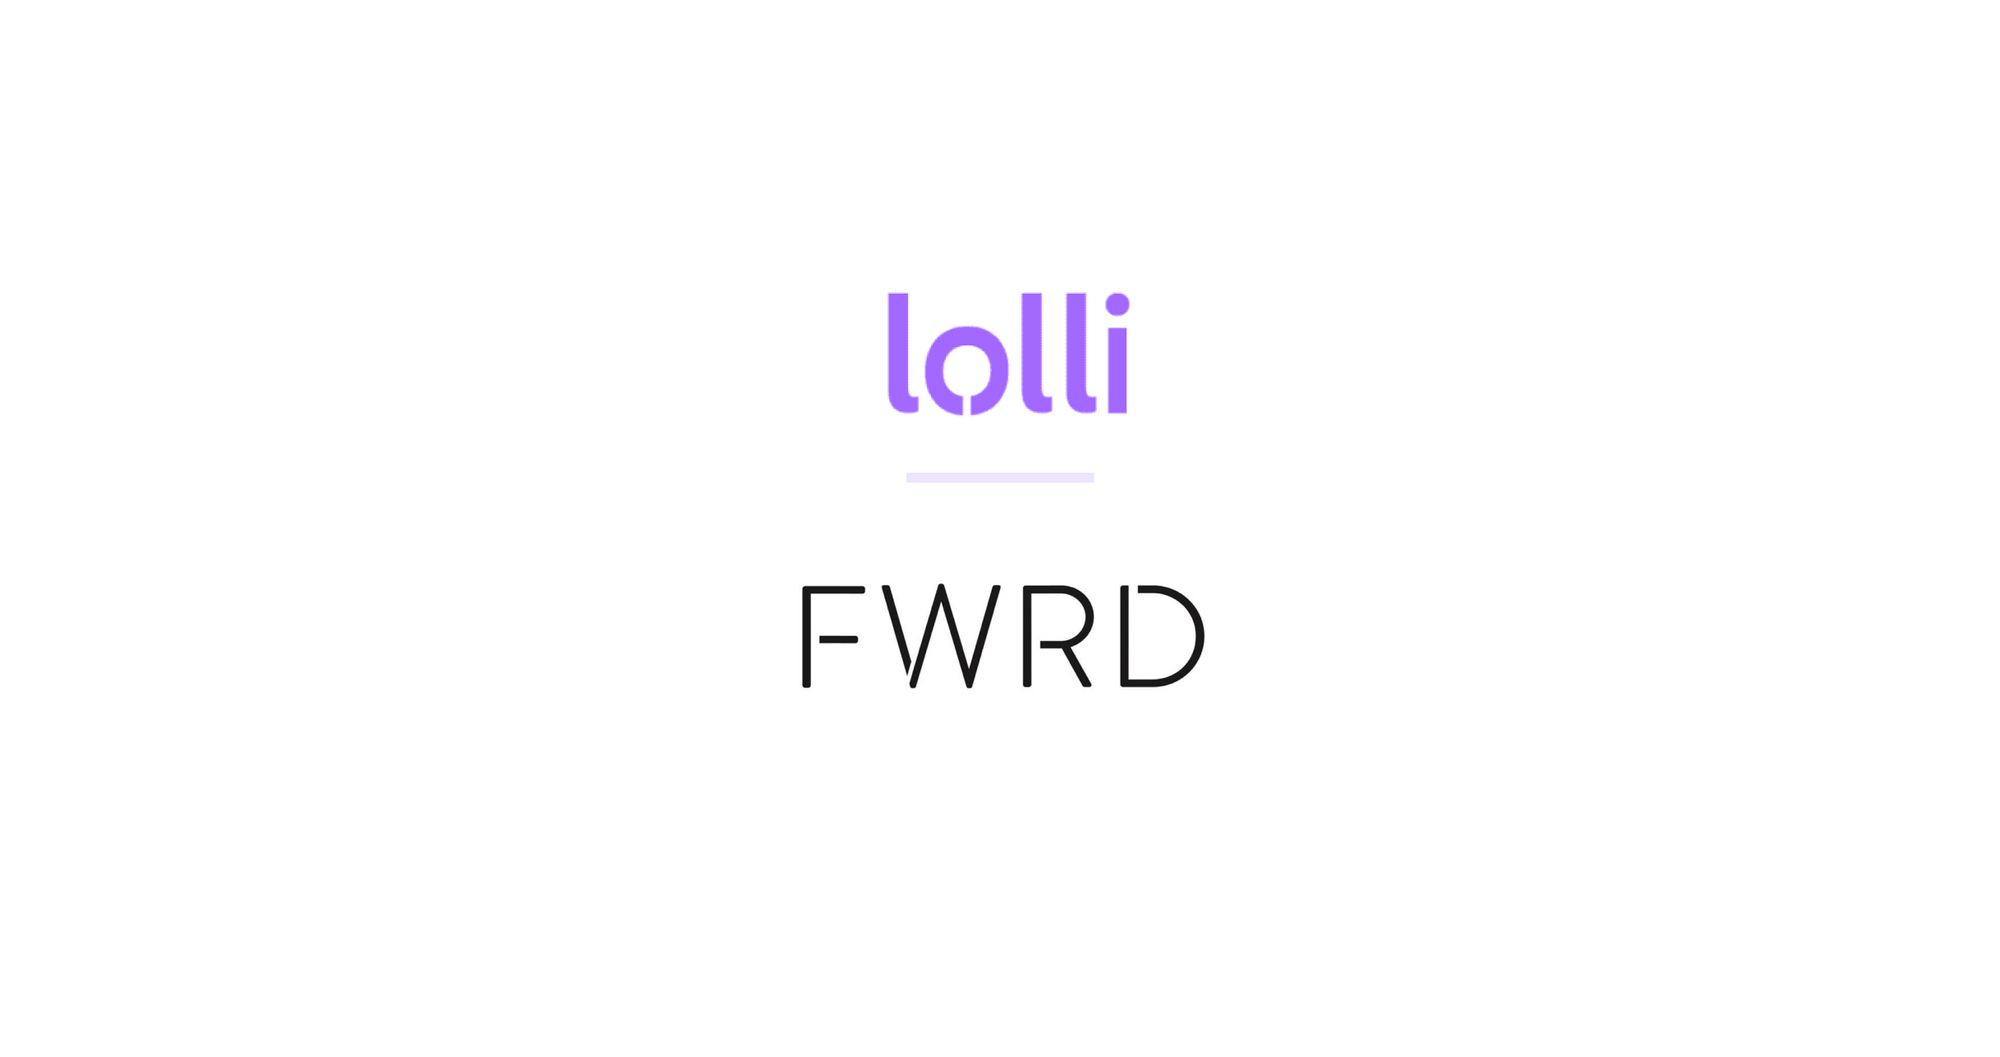 FWRD is Now on Lolli!